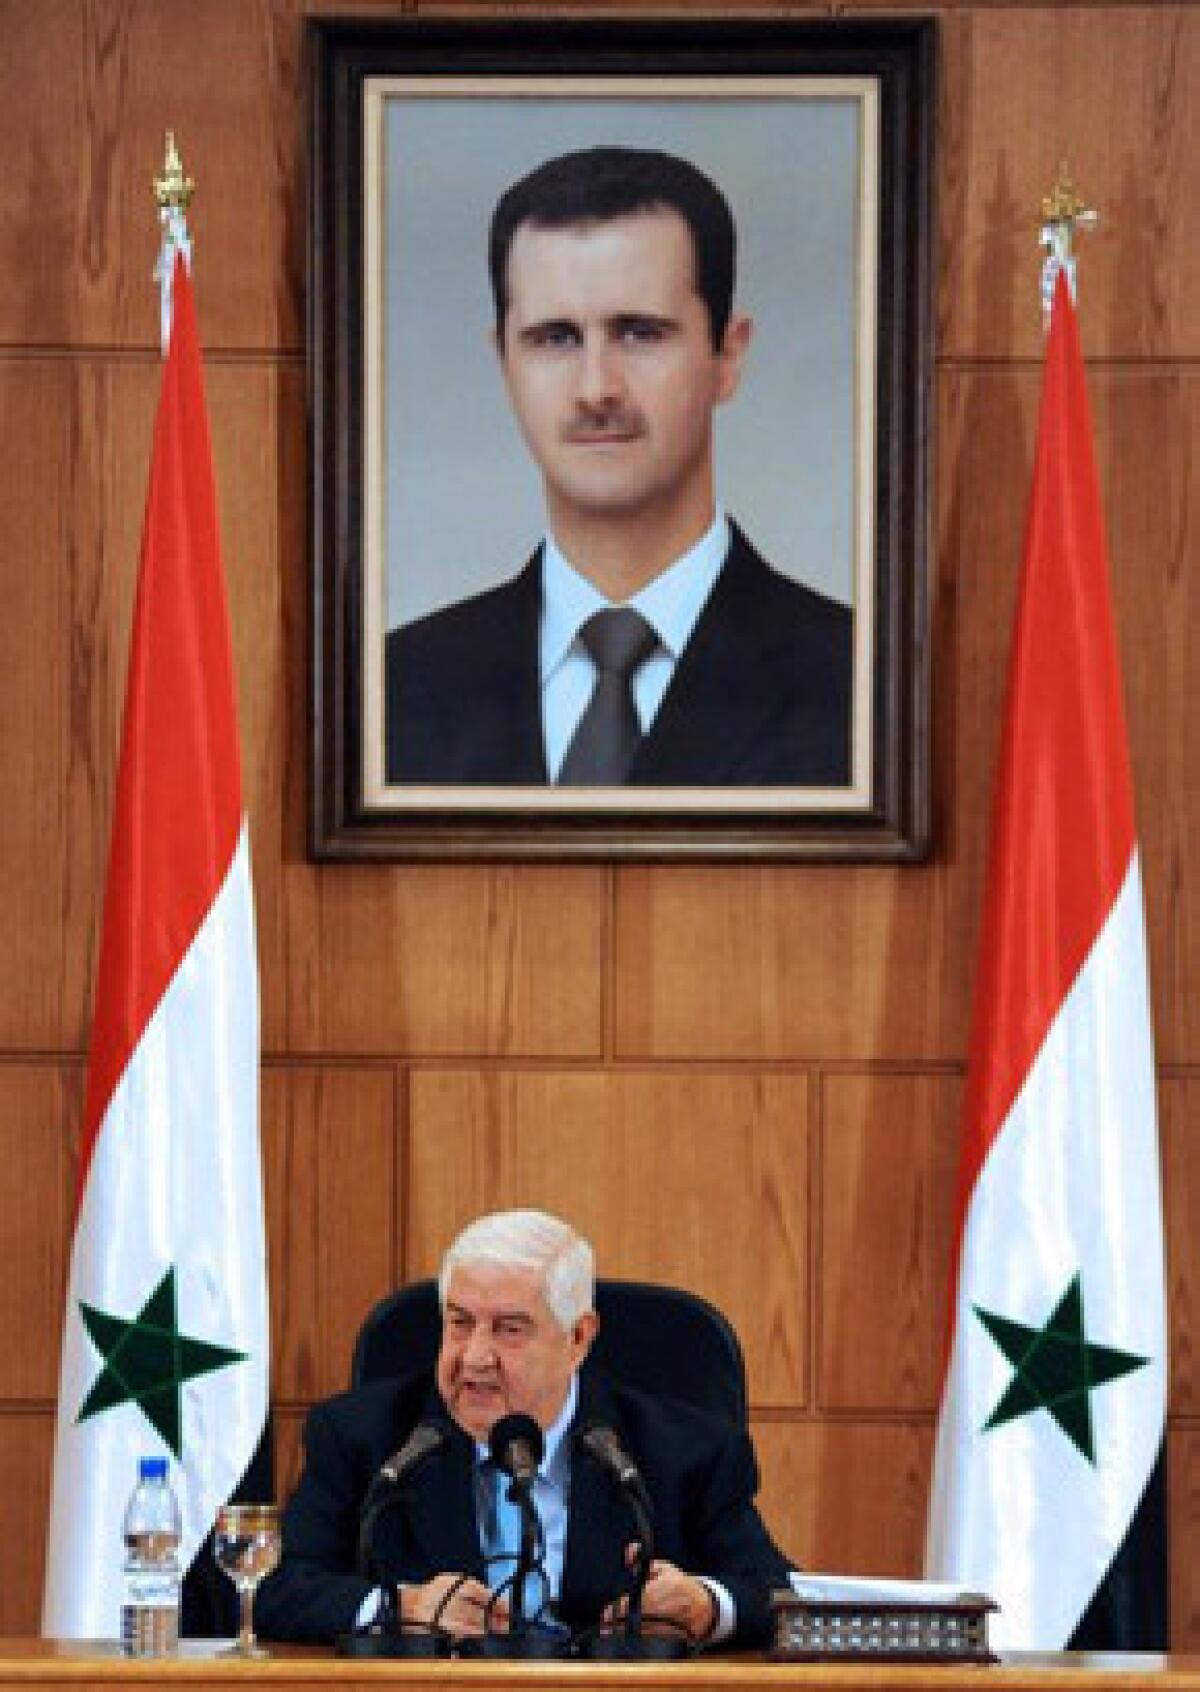 Syrian Foreign Minister Walid Moallem speaks Tuesday under a portrait of President Bashar Assad during a news conference in Damascus.